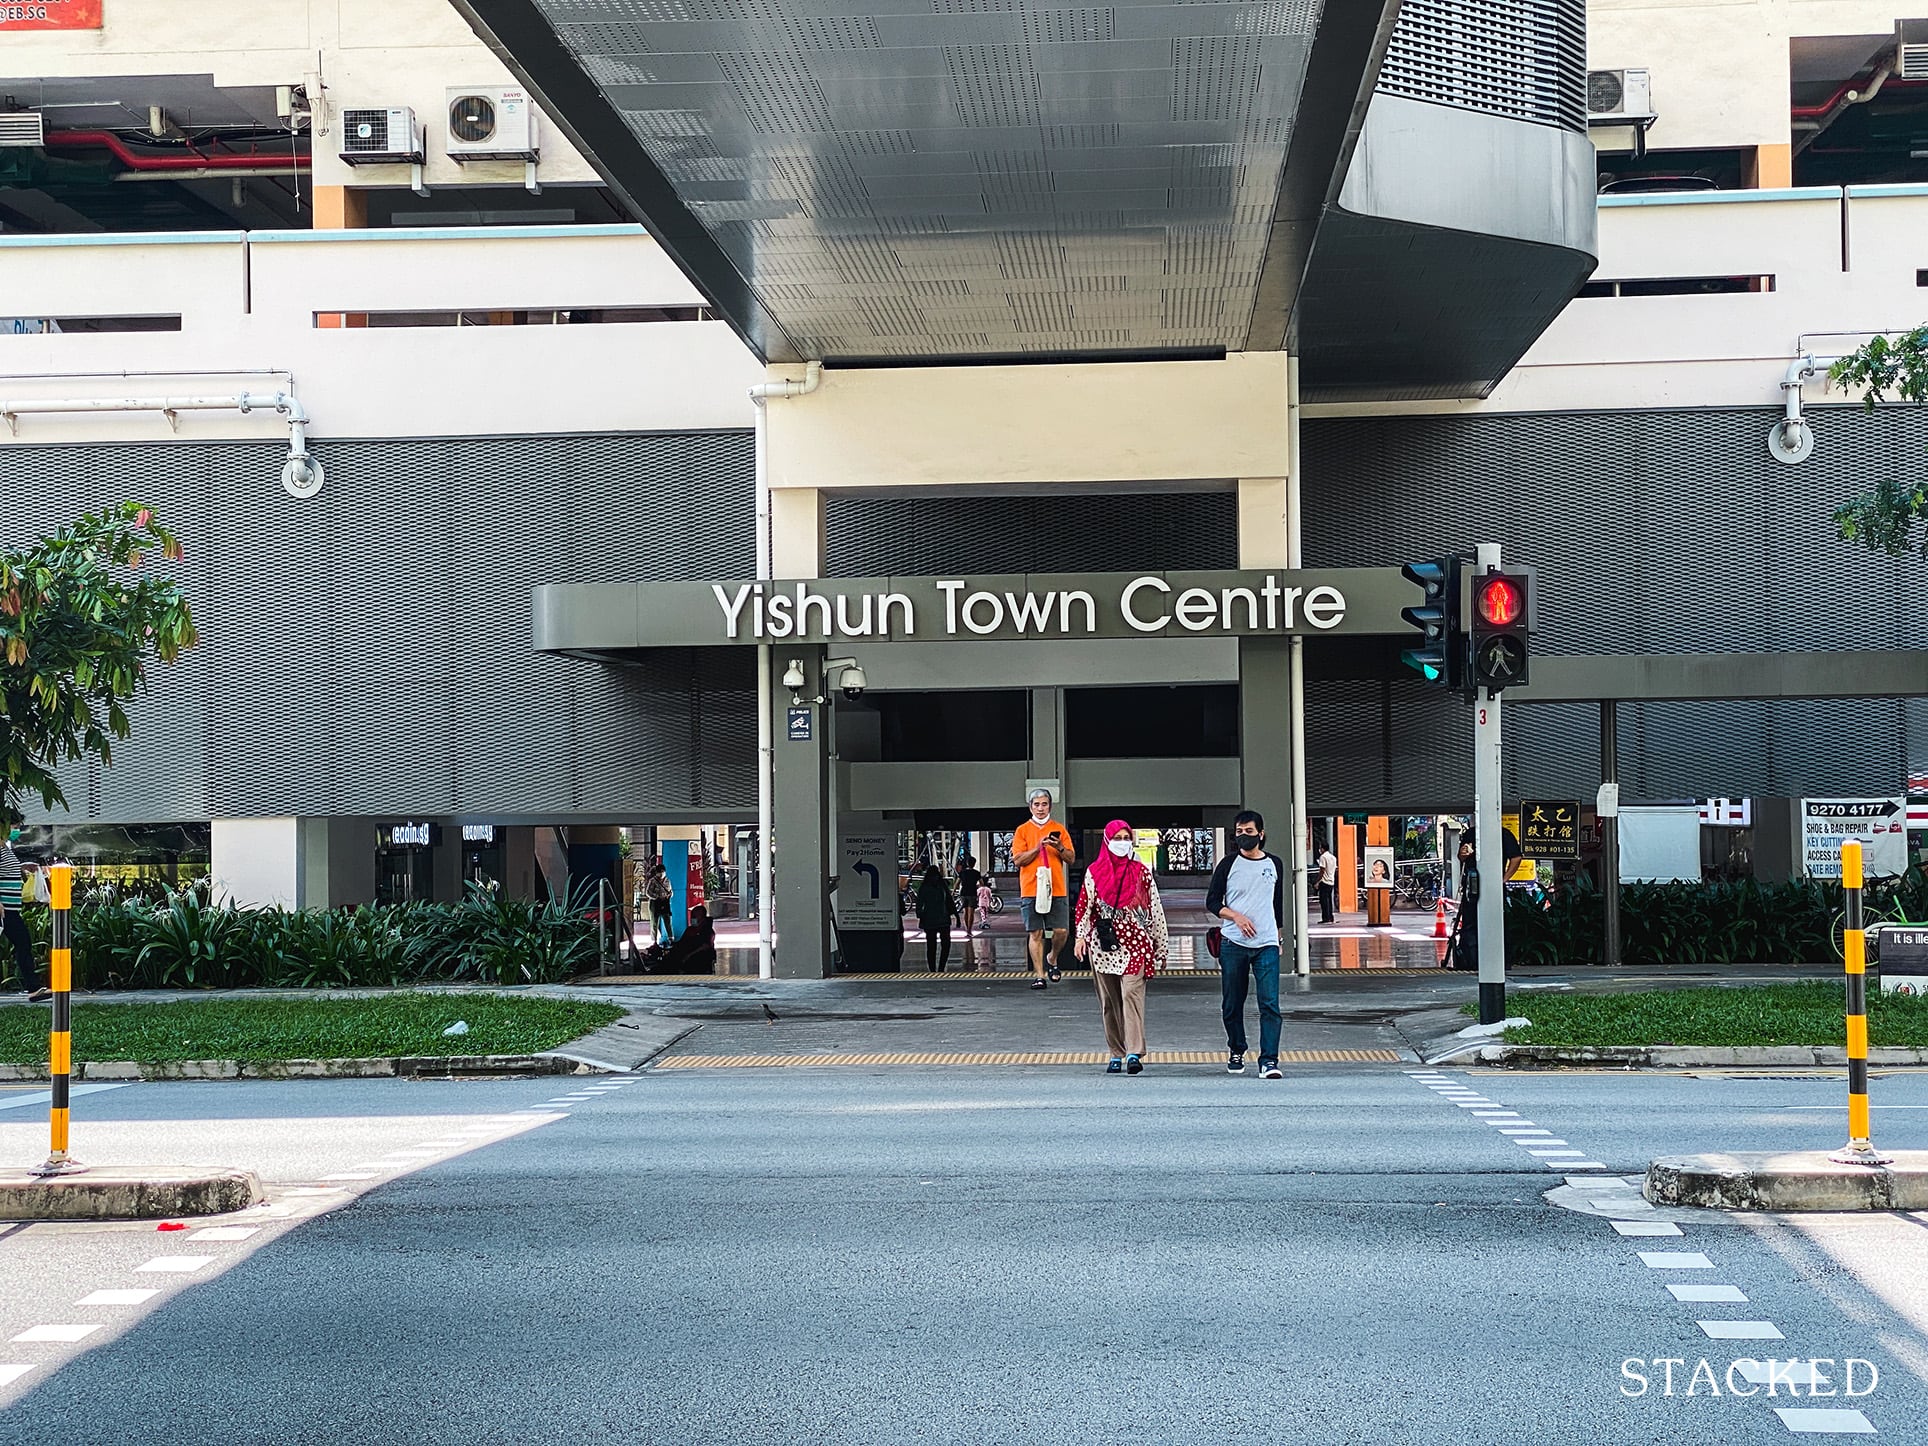 Buying Property In Yishun Heres What You Need To Know About This